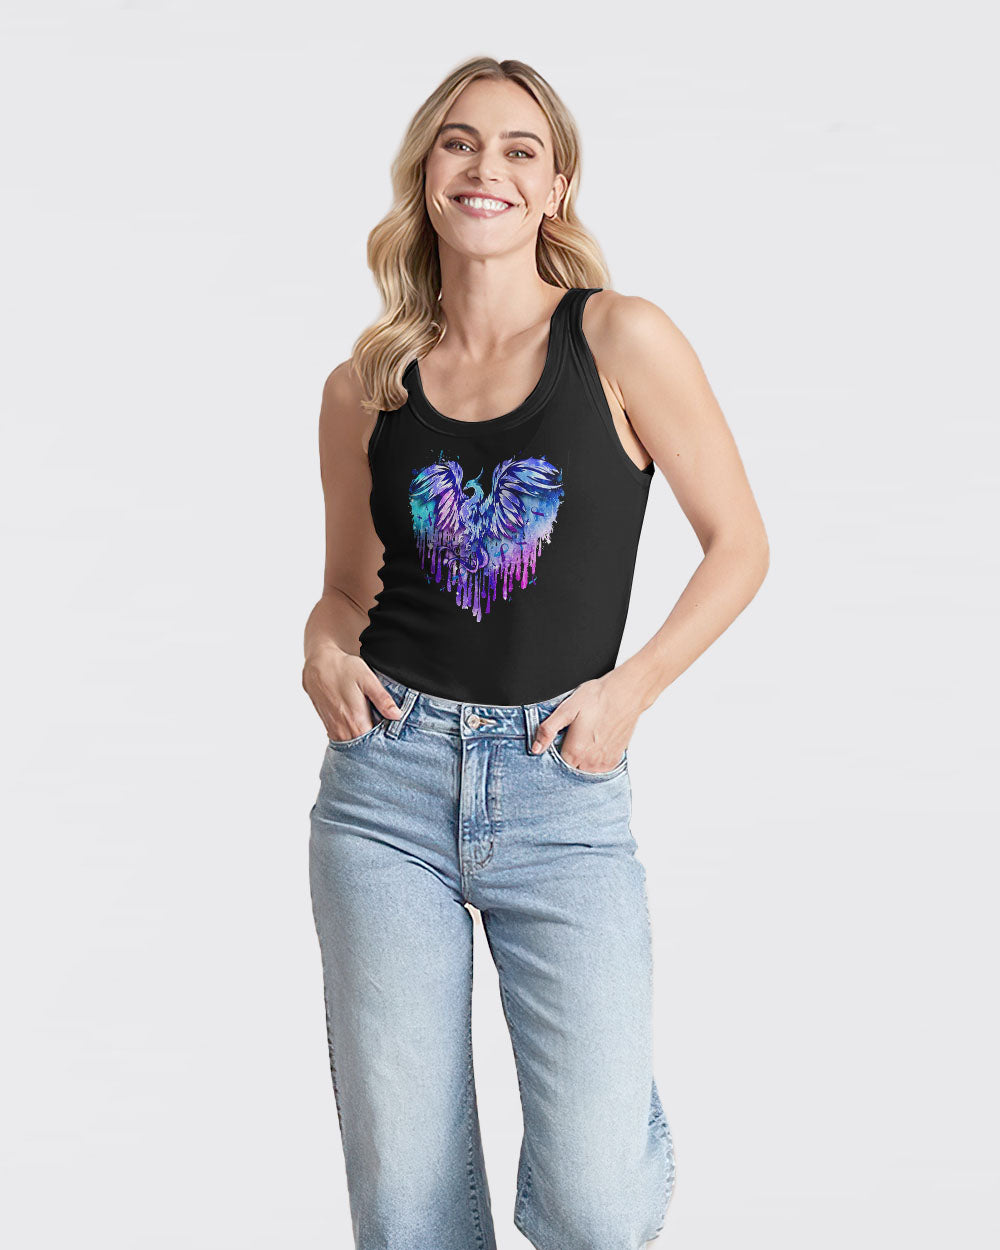 Rise From The Ashes Phoenix Women's Suicide Prevention Awareness Tanks